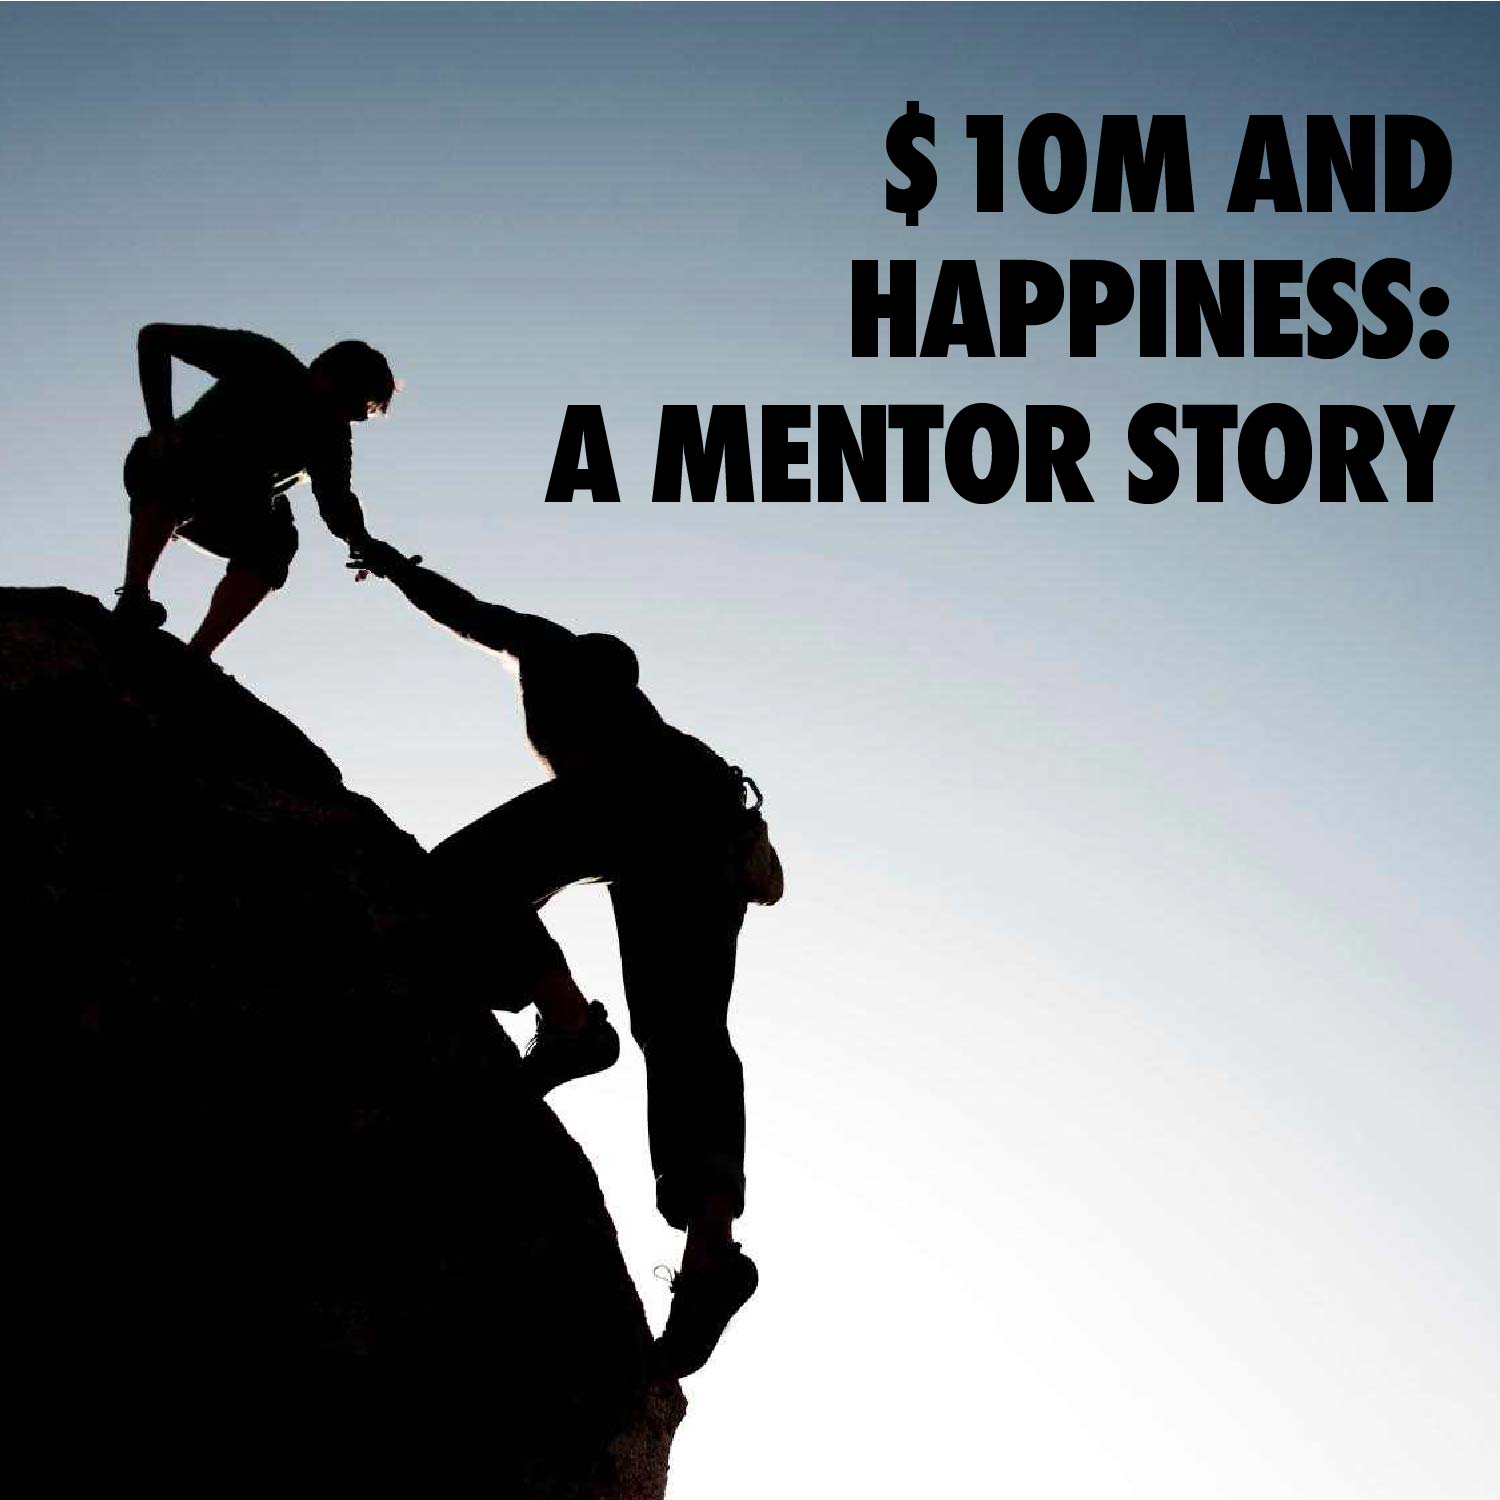 Image of someone pulling a climber up to the top of a hill | Text: $10M and Happiness: A Mentor Story